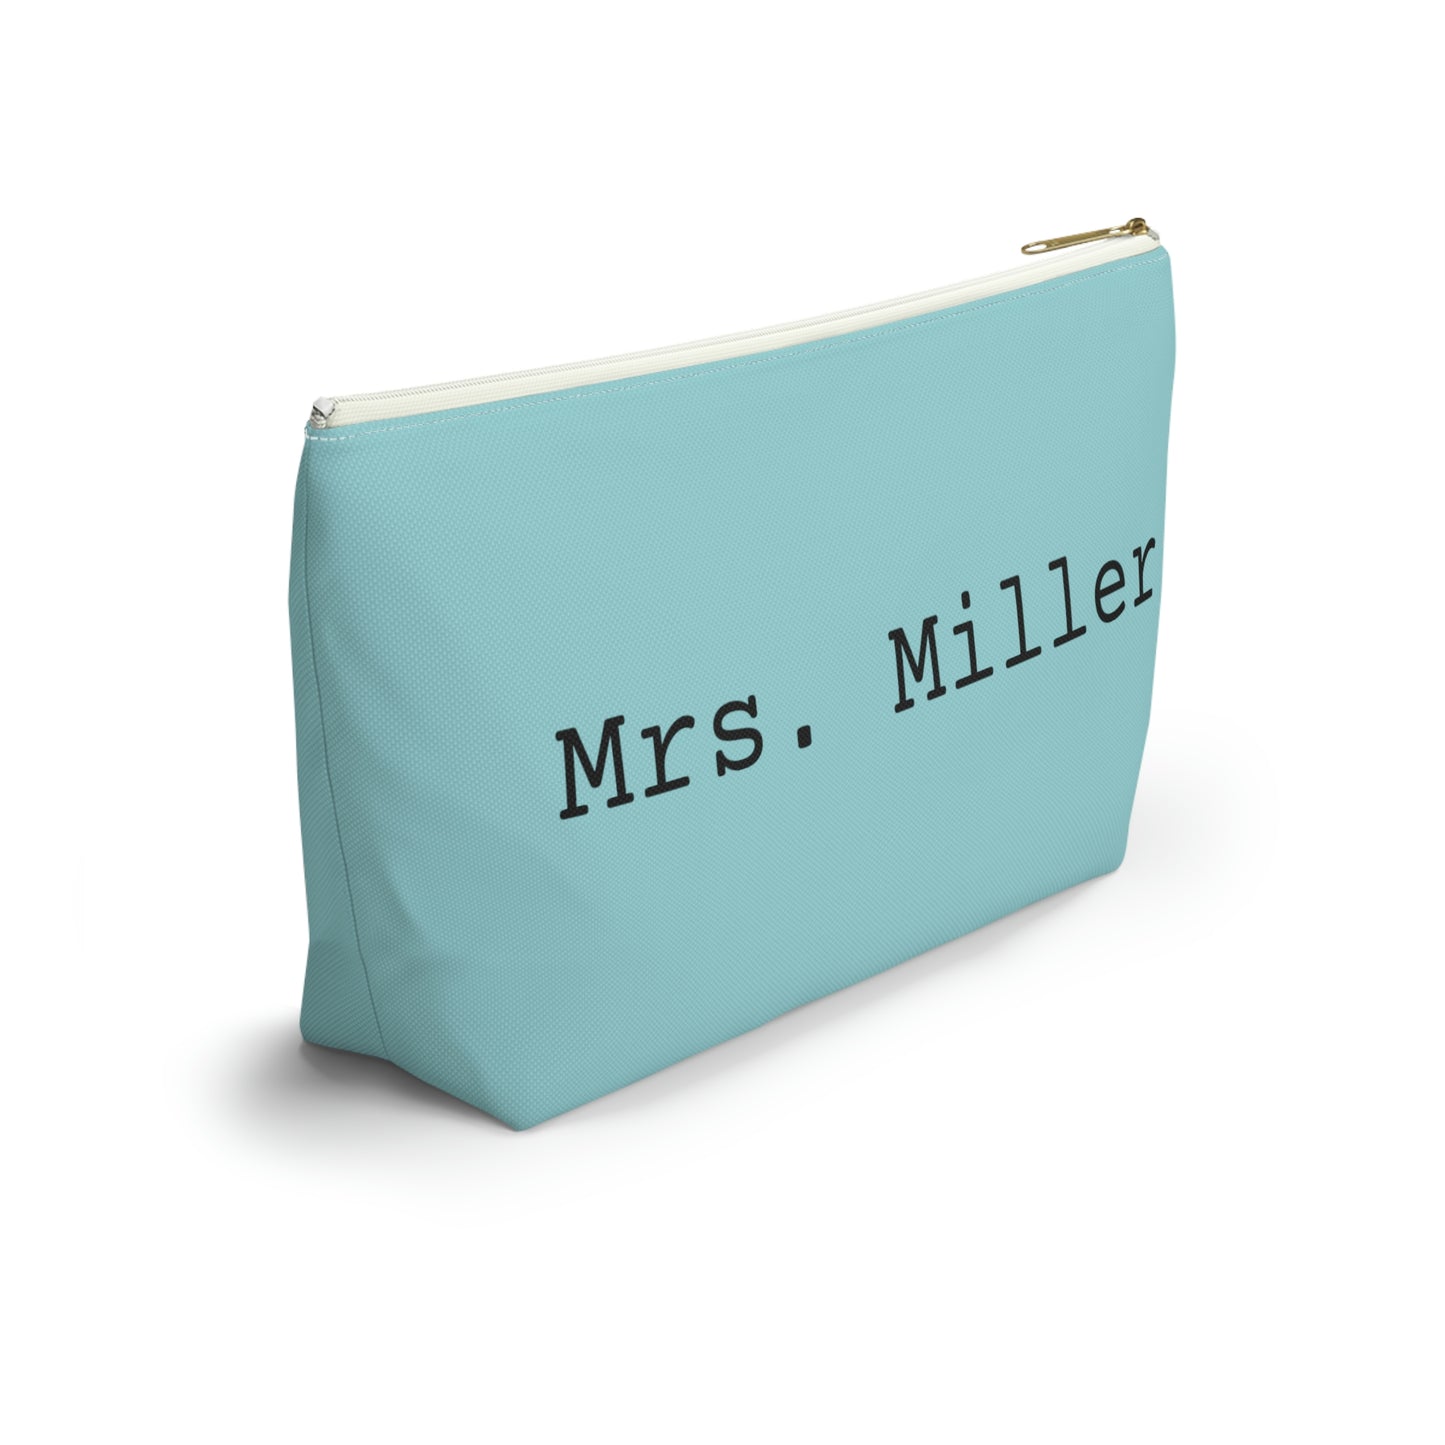 Personalized Teacher Zippered Pouch